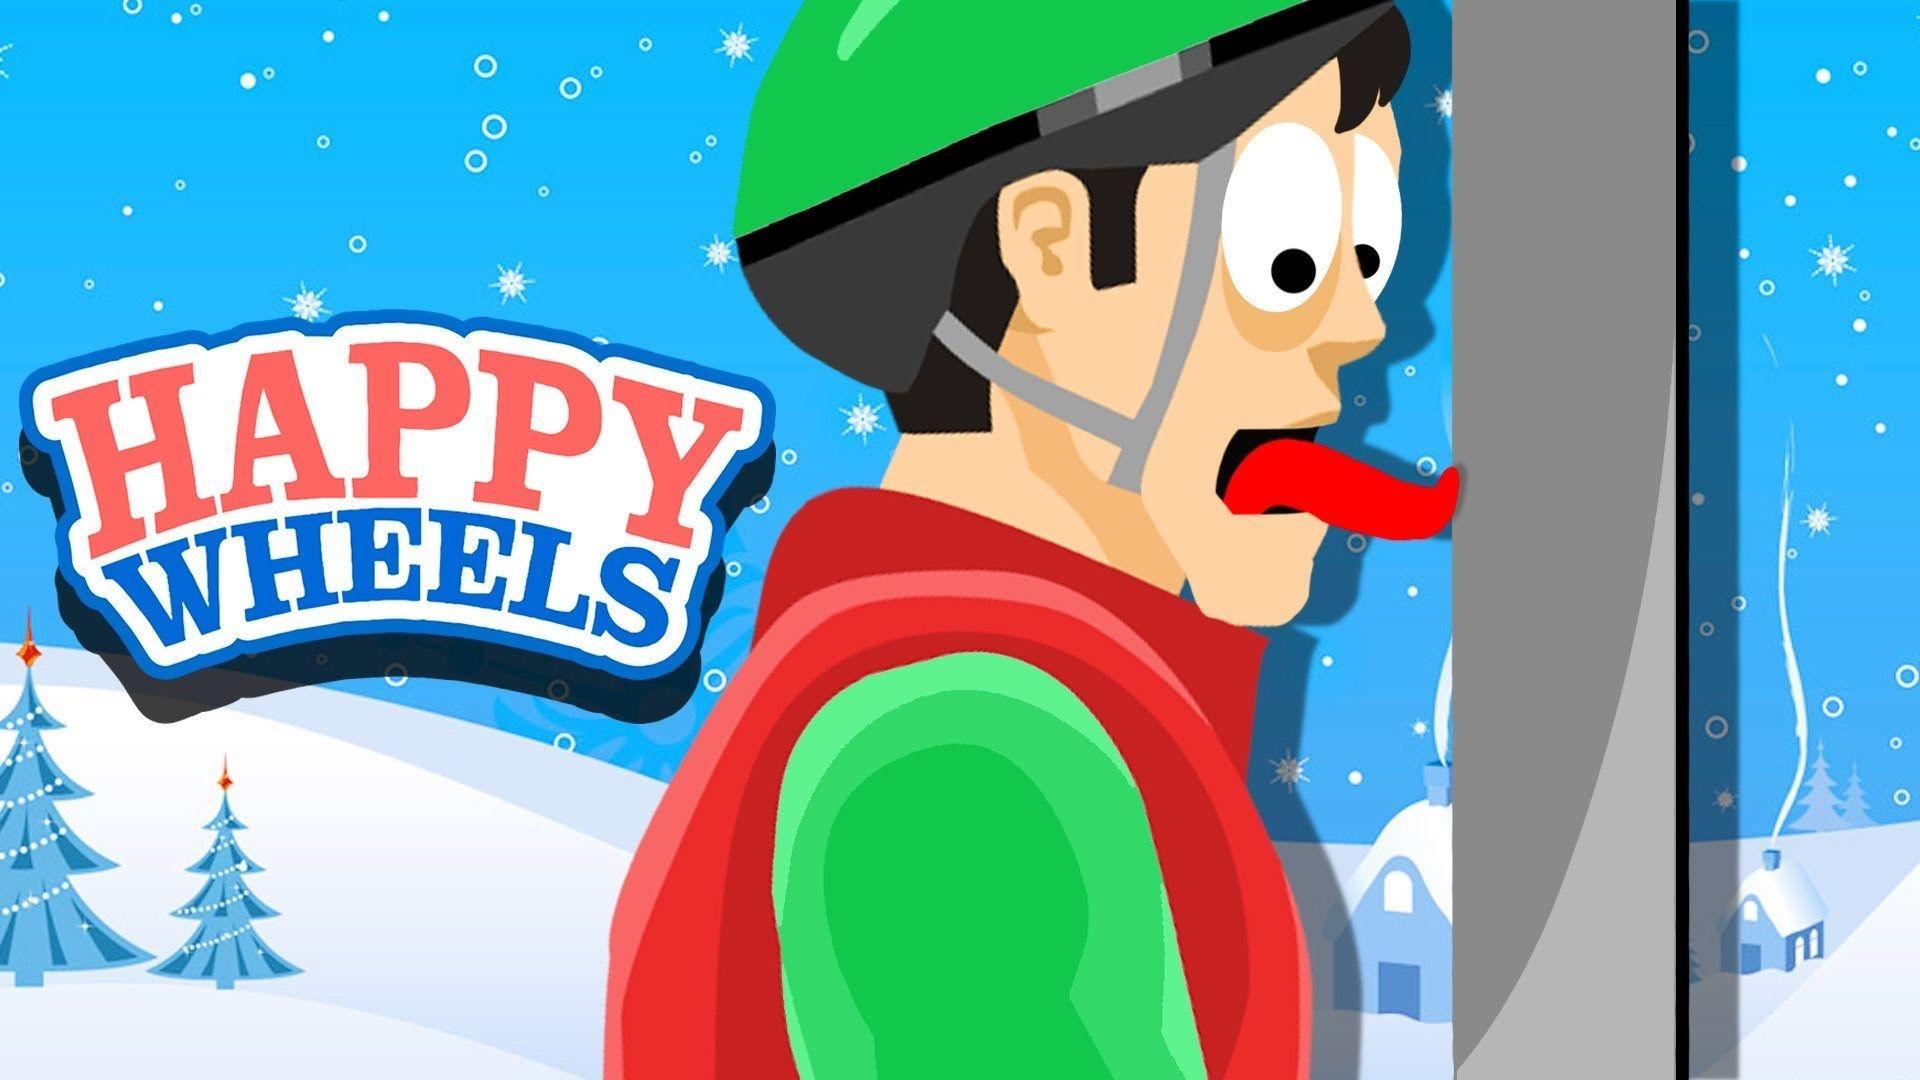 happy wheels pc game download